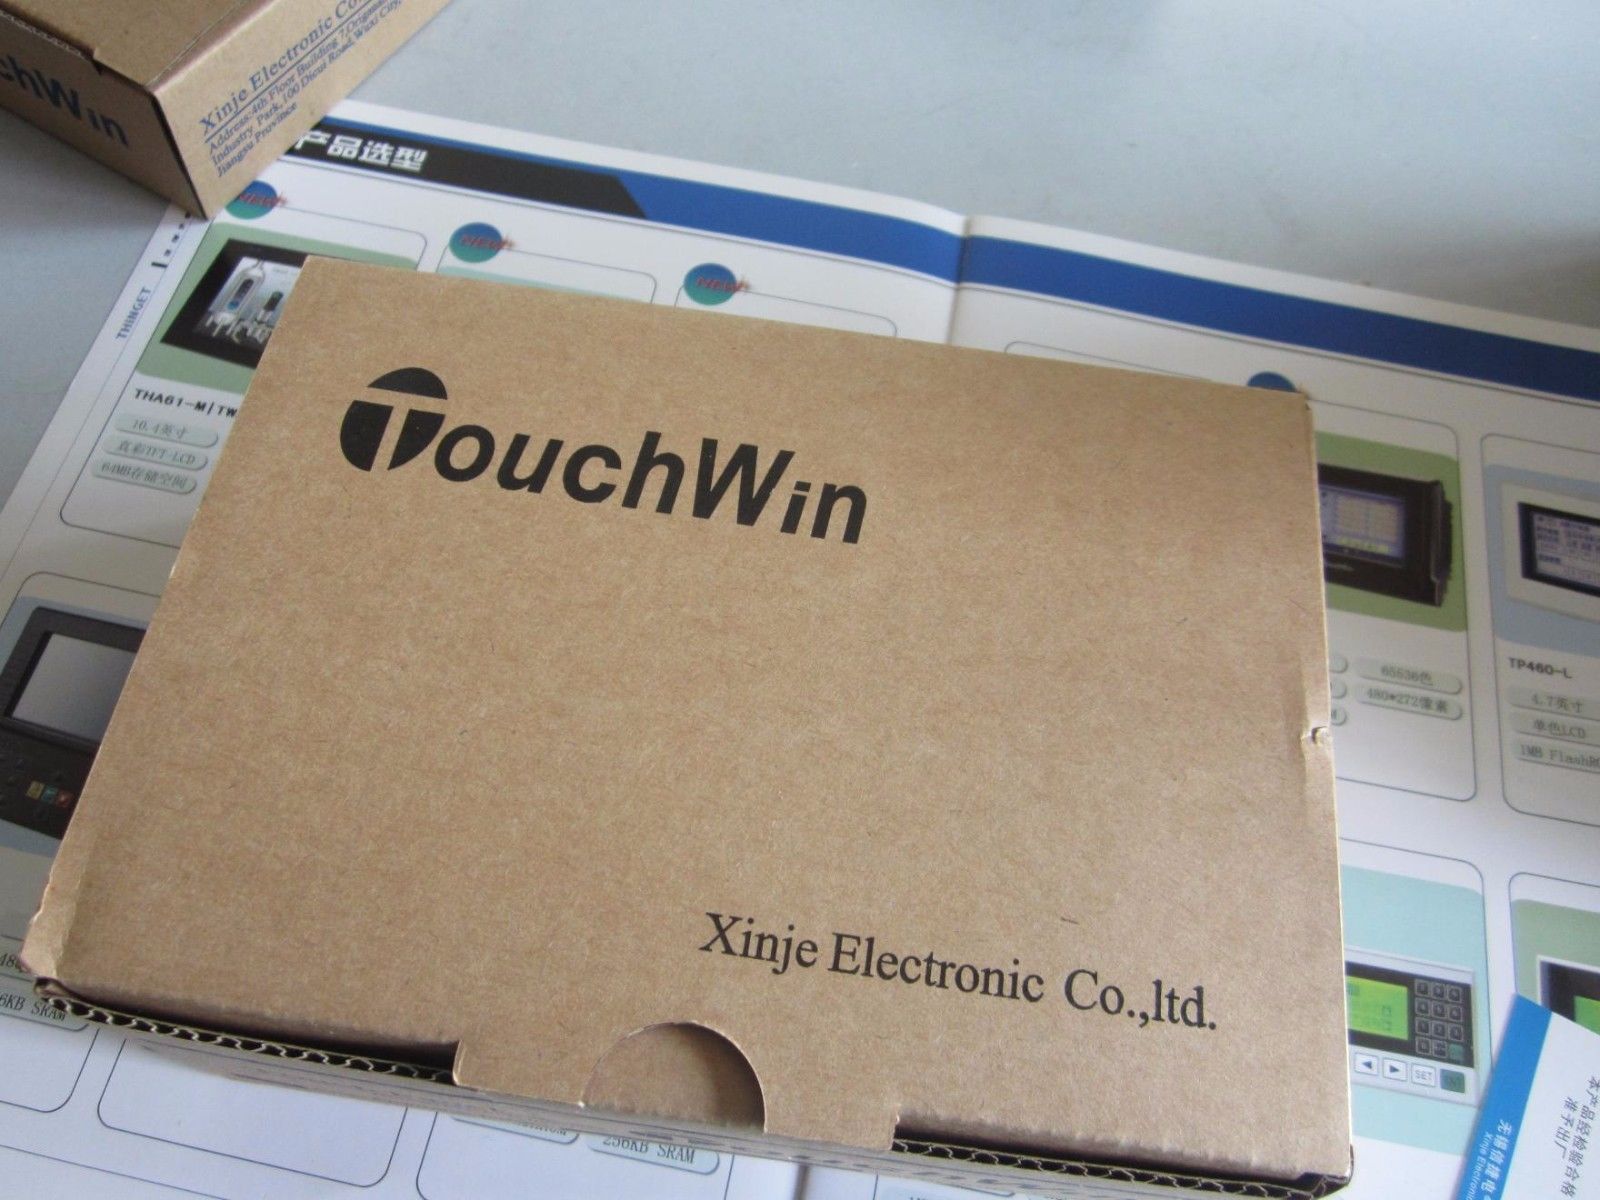 TH465-MT XINJE Touchwin HMI Touch Screen 4.3 inch with program cable new